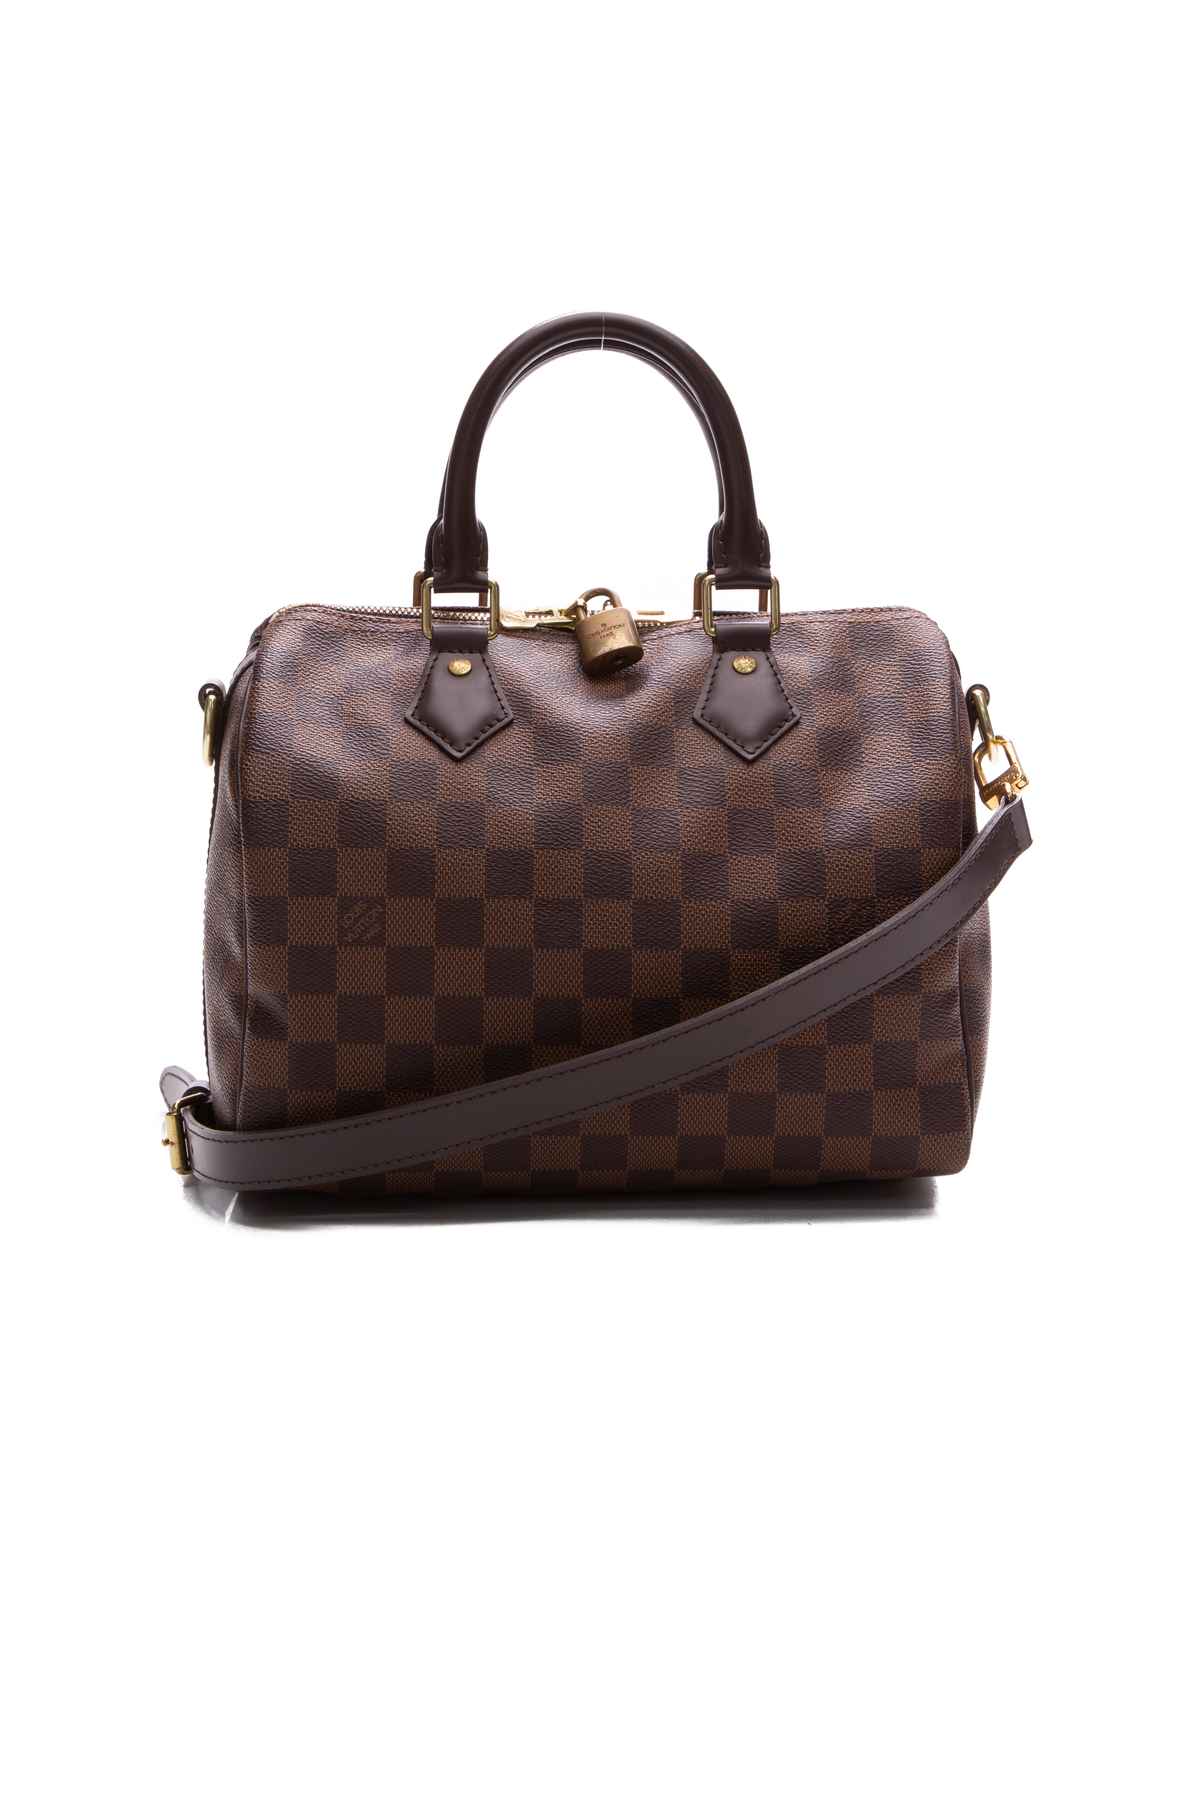 With this extender it is now a mini shoulder bag! #louisvuitton